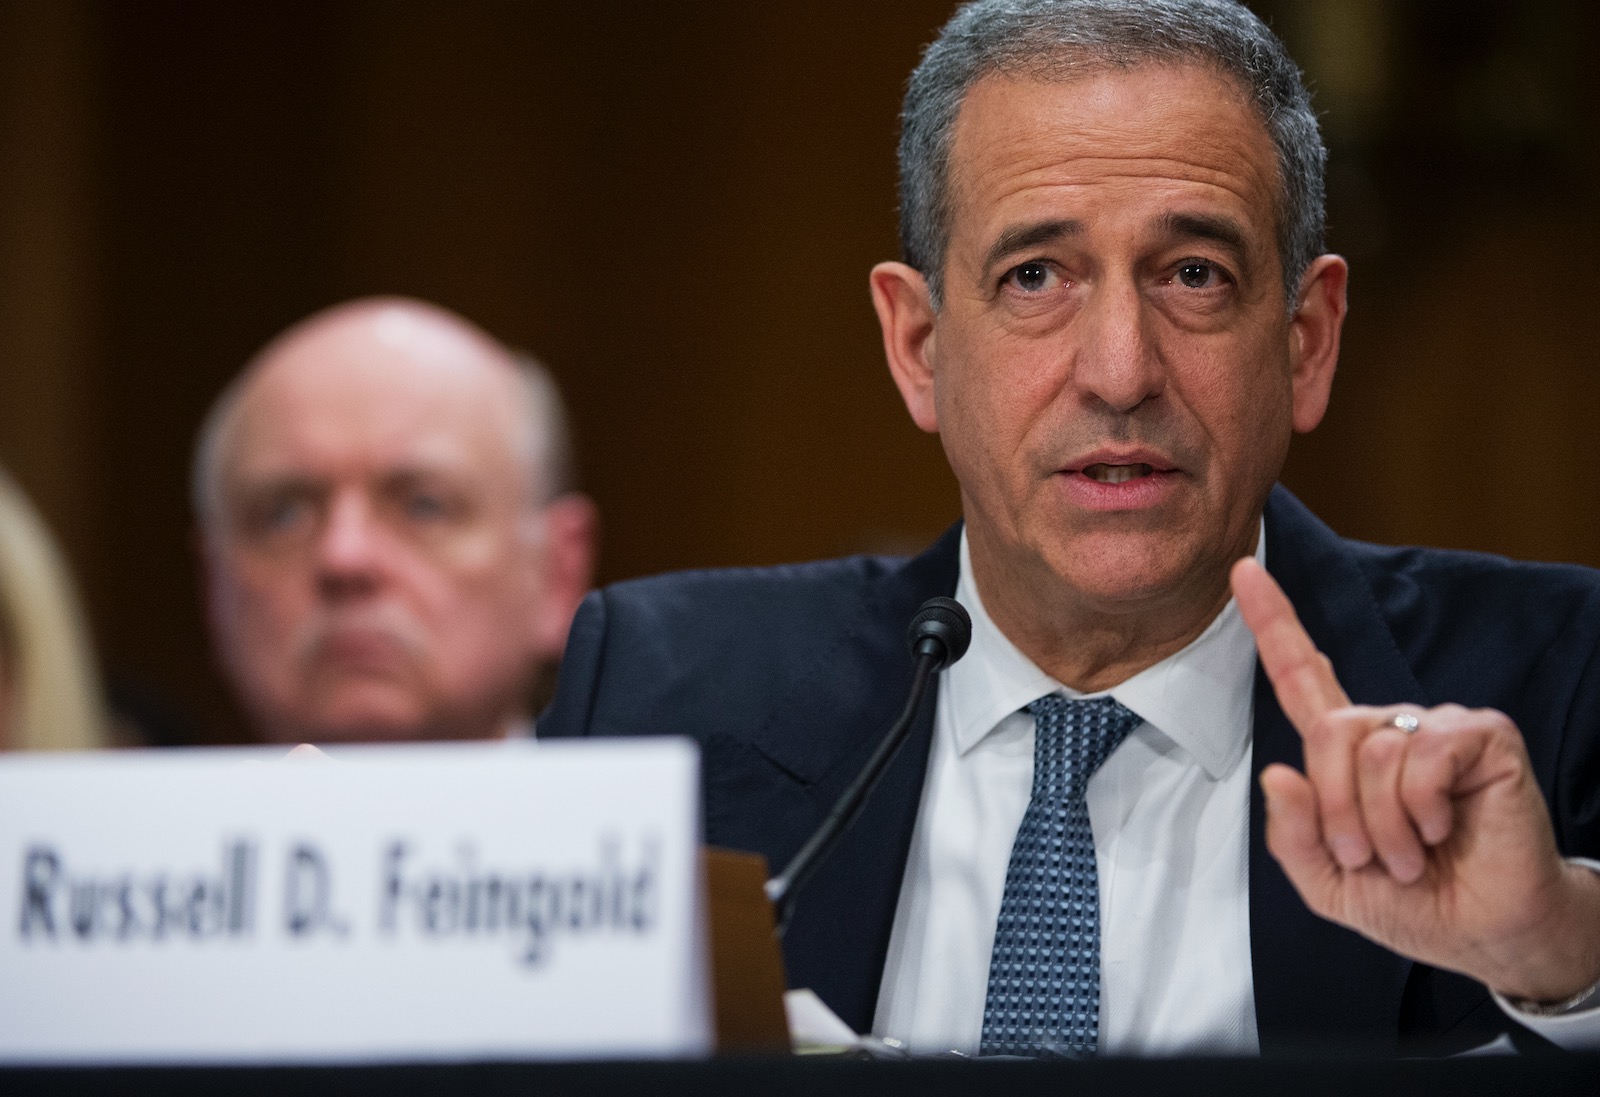 Former Senator Russ Feingold testifying to the Senate Foreign Relations Committee about his work as a special envoy for the Great Lakes Region of Africa, Capitol Hill, Washington, D.C., February 26, 2014